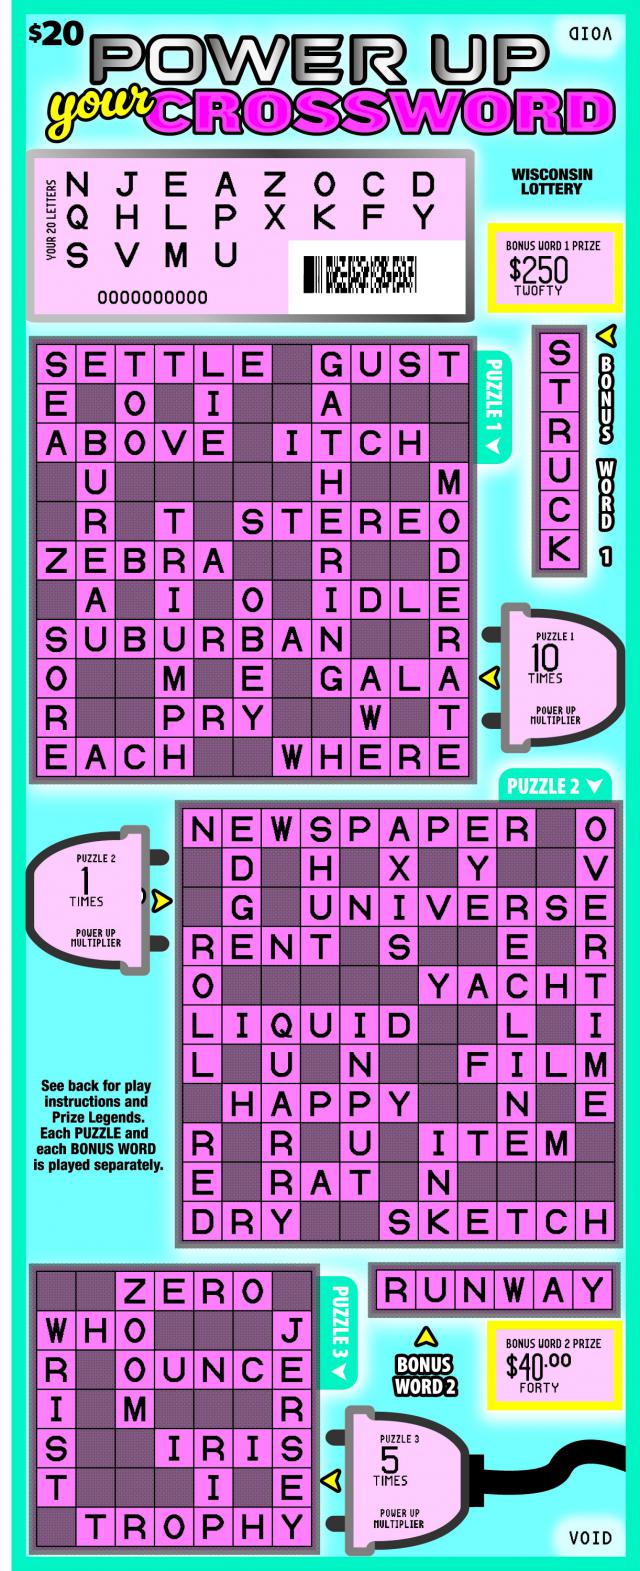 Power up Your Crossword instant scratch ticket from Wisconsin Lottery - scratched